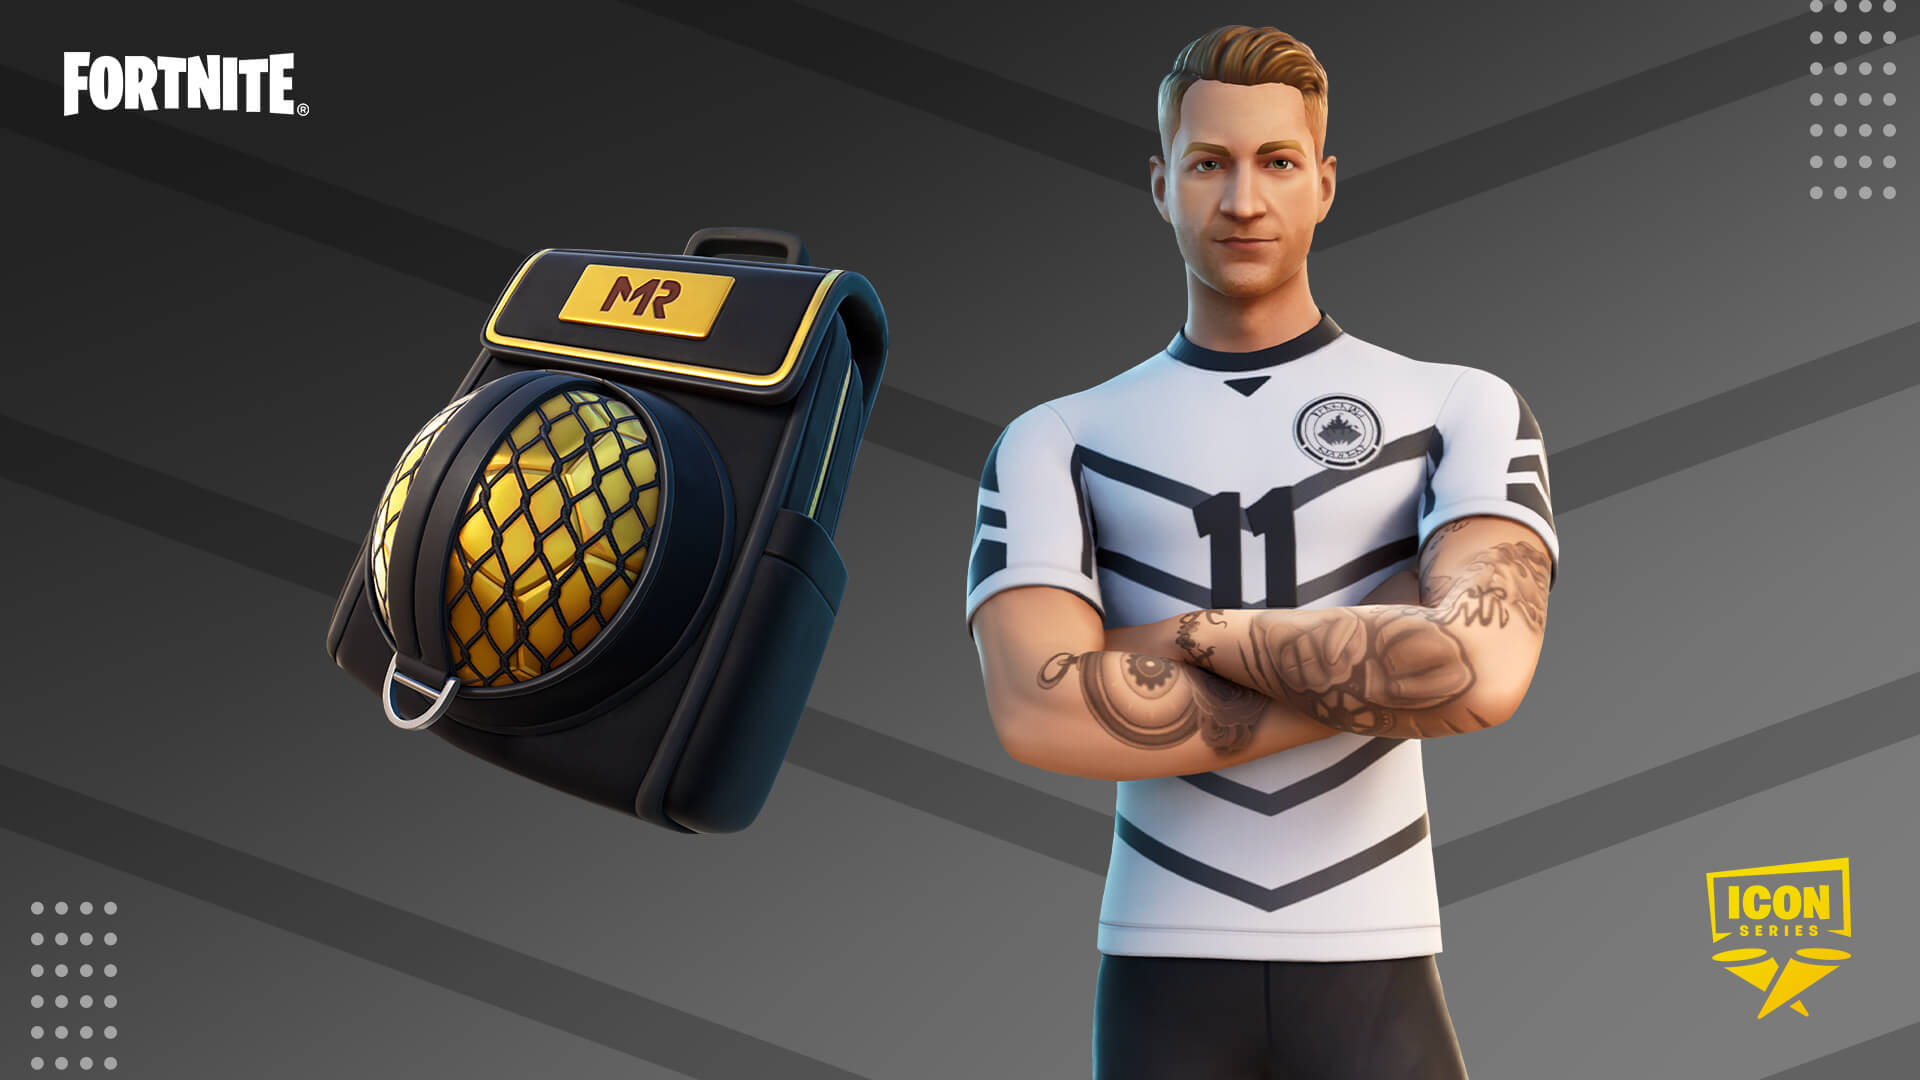 Harry Kane and Marco Reus join the Fortnite Icon Series